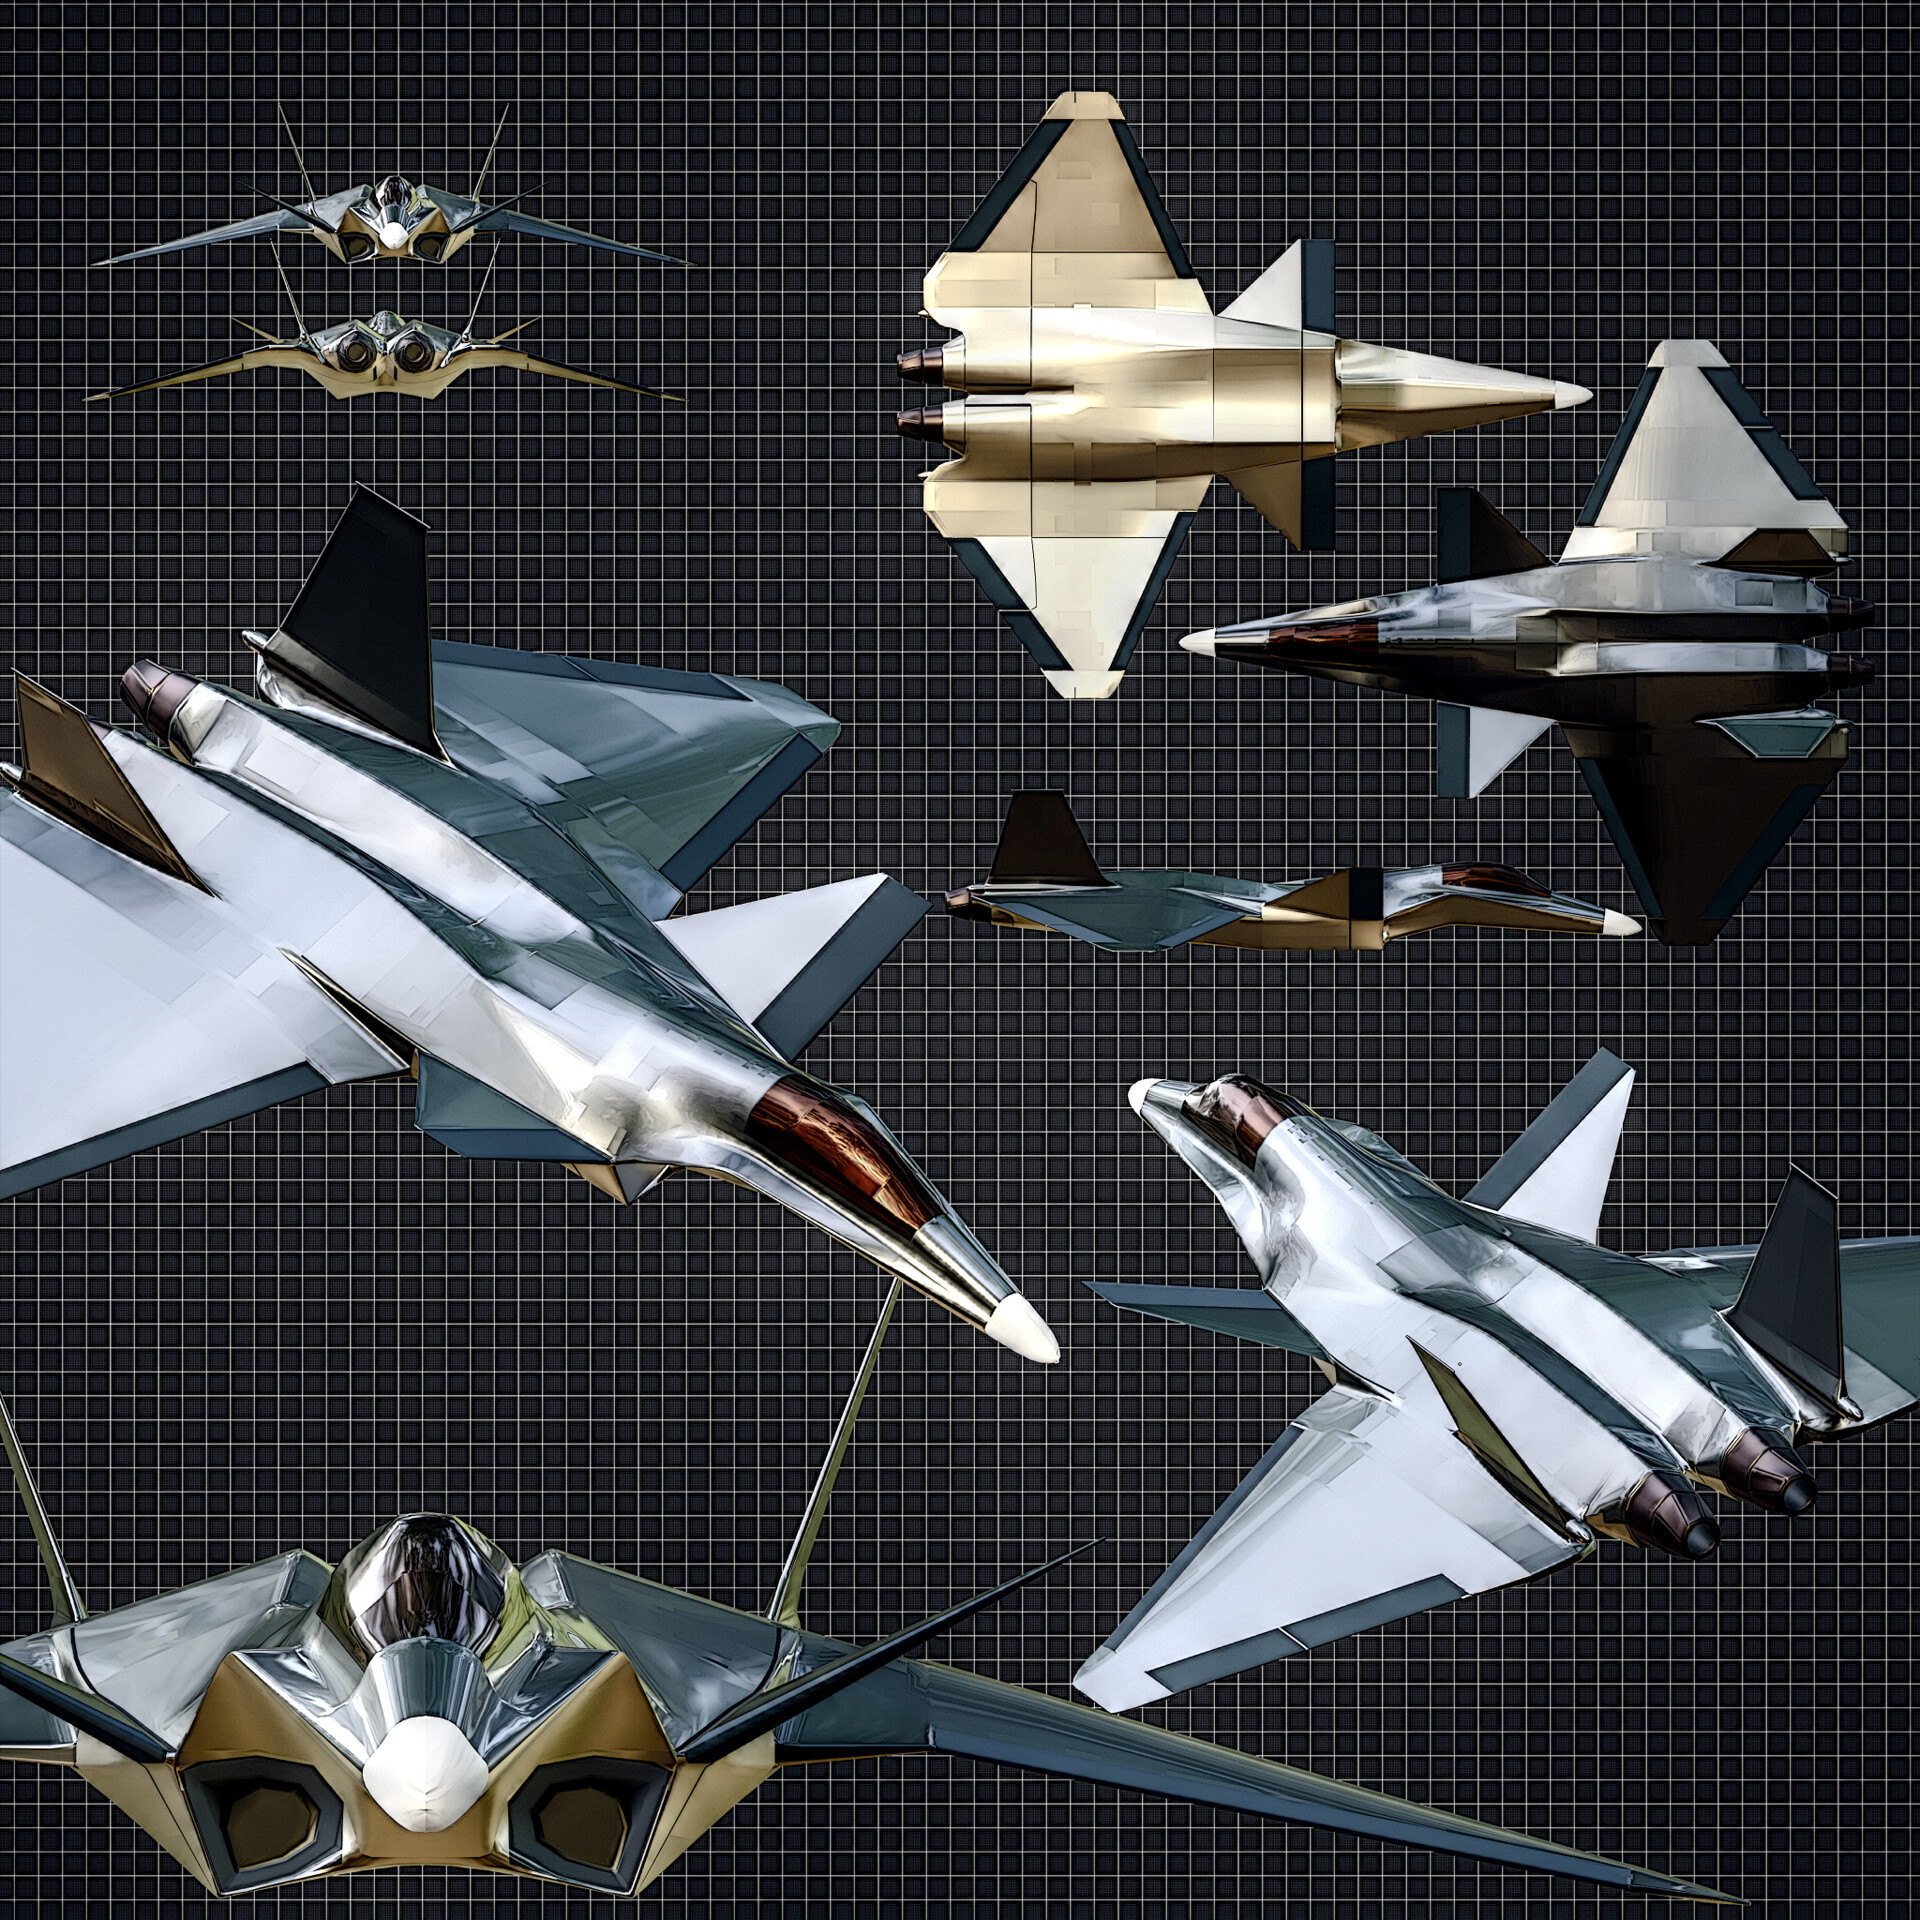 Sketching the 6th generation fighter jet - AeroTime